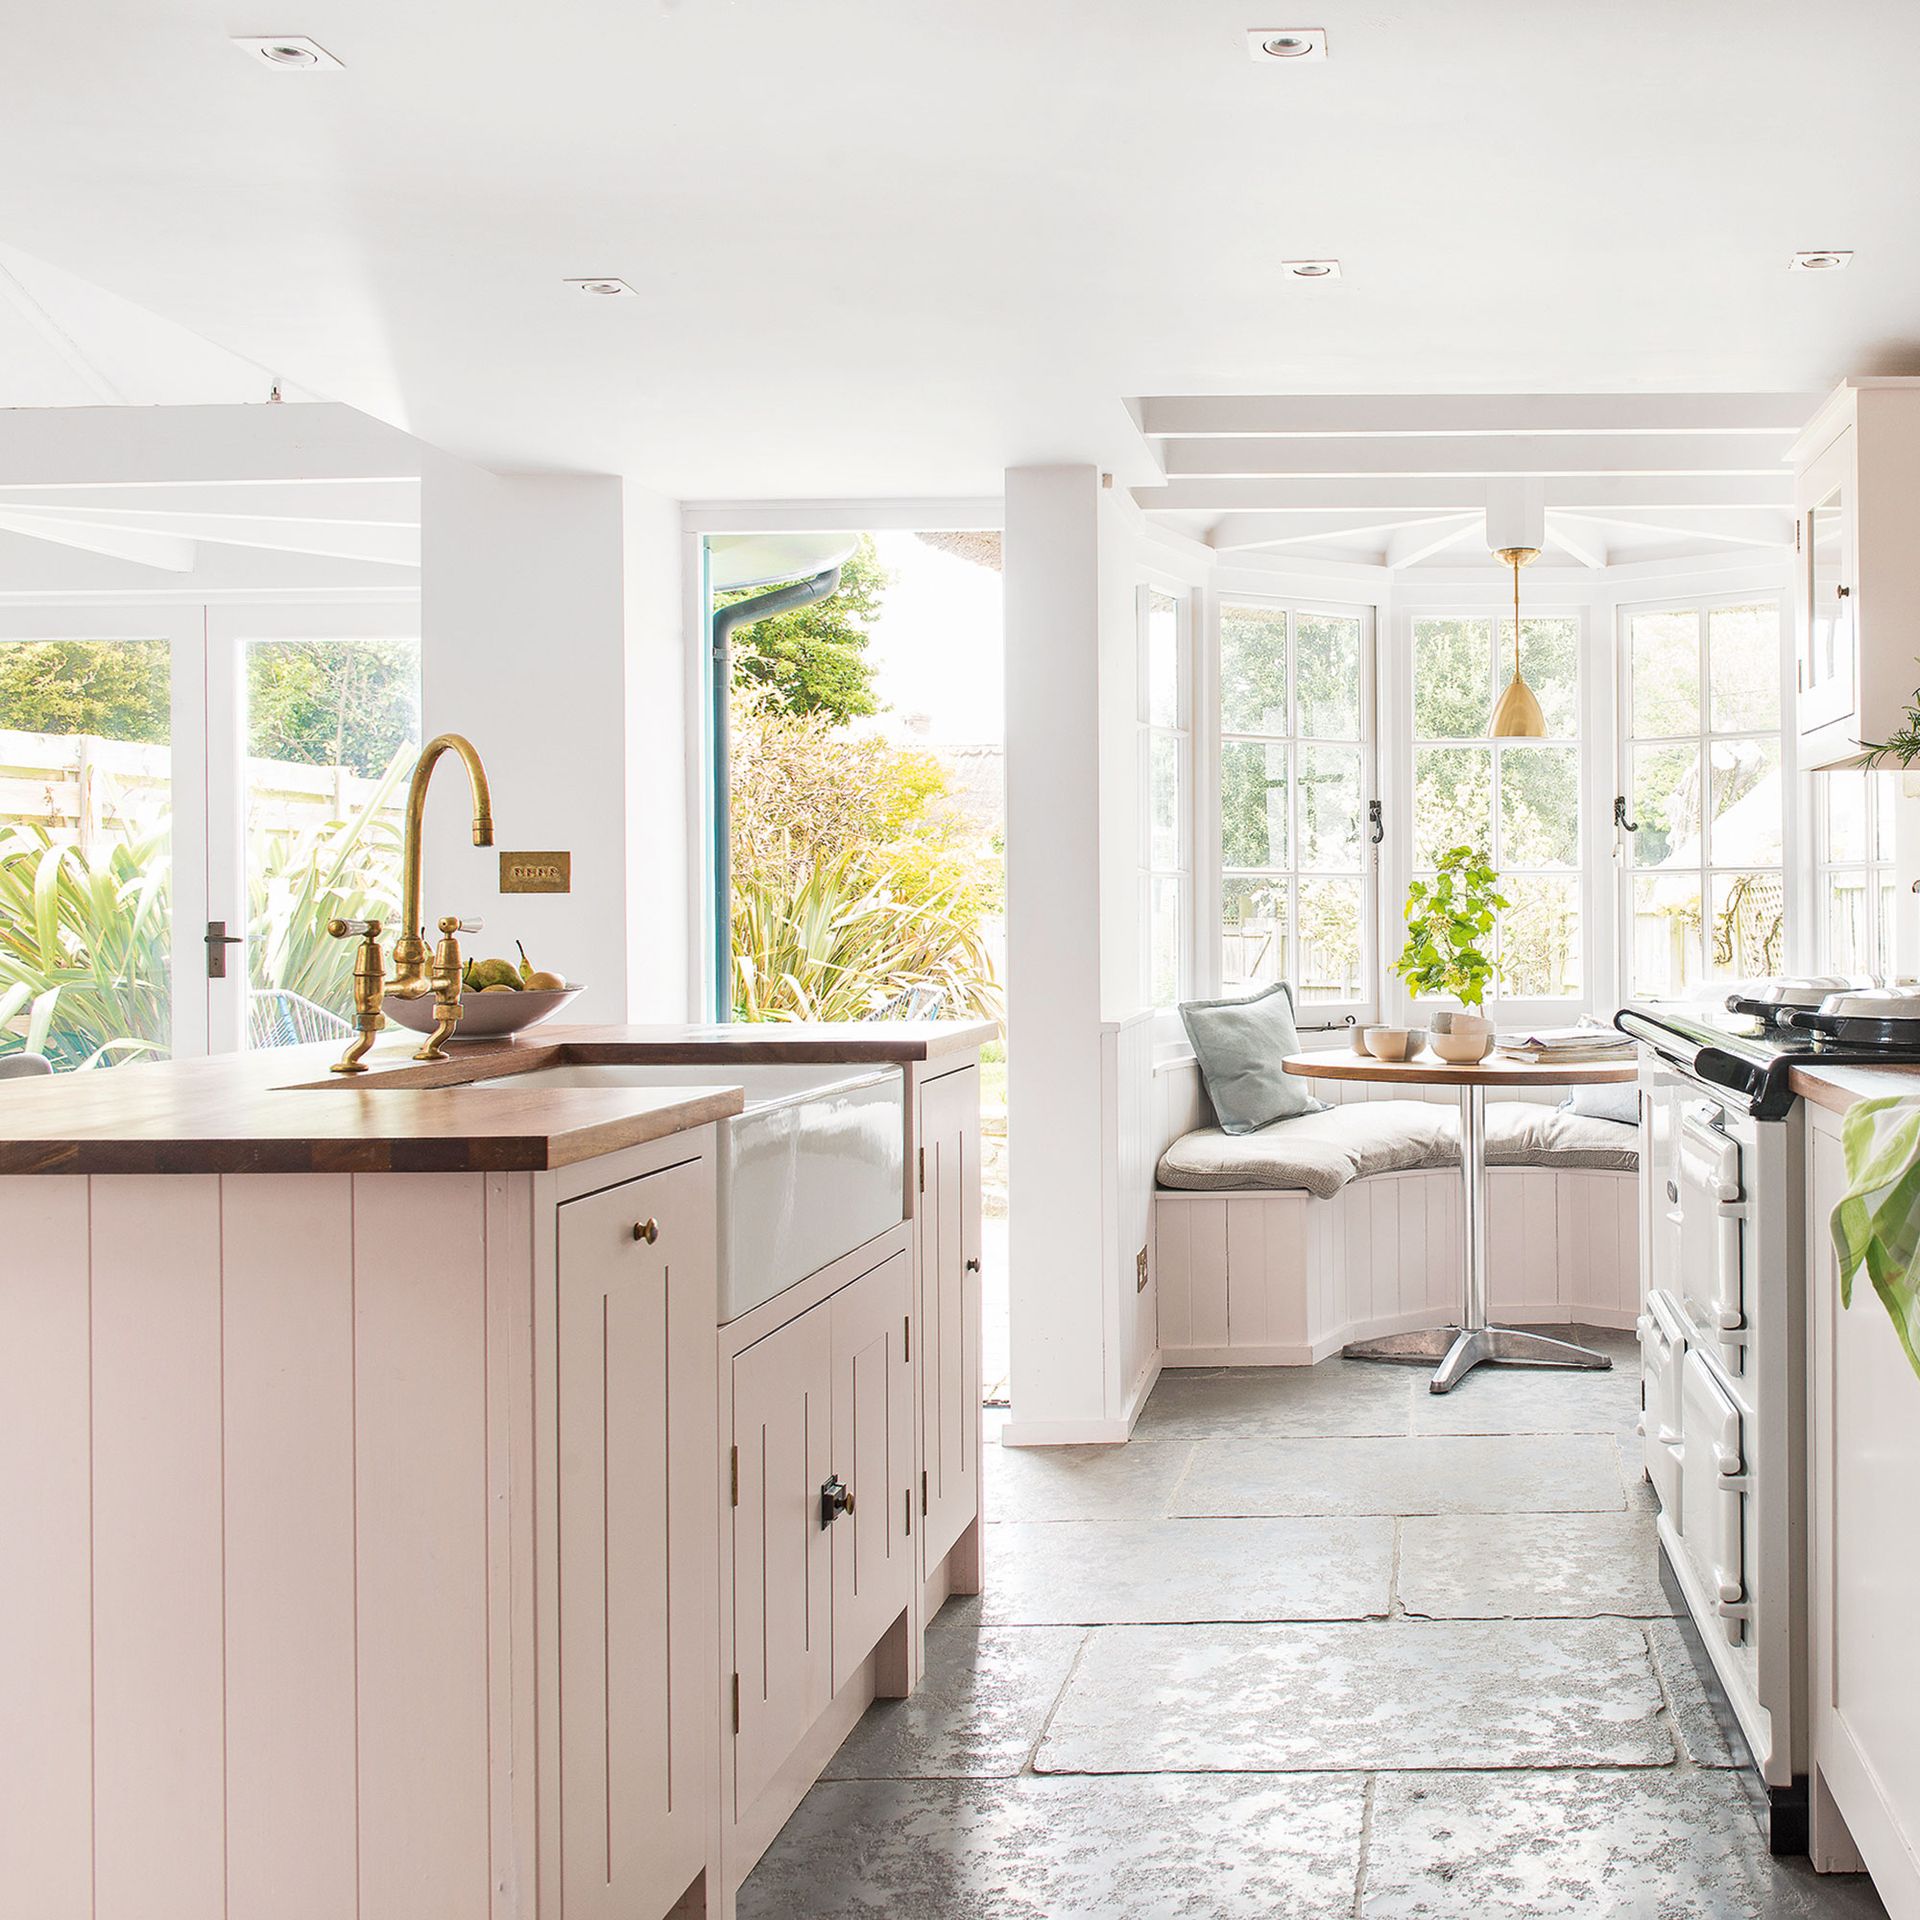 <p>                     All too often people think of country kitchen decor as being dark and pokey. While some tiny cottage with limited windows can suffer from a lack of light, this isn't an issue with the style at large.                   </p>                                      <p>                     Keep country style kitchens light and bright by using the same tips and tricks you would when working out how to make a small kitchen look bigger. Windows are key, and make sure you've really planned out your lighting so there aren't any shadowy corners when the sun goes down. Choose paler tones for the cabinetry, and a white ceiling will help the space seem brighter. Finally, glazed or mirrored surfaces like tiles or hardware will help bounce light around.                   </p>